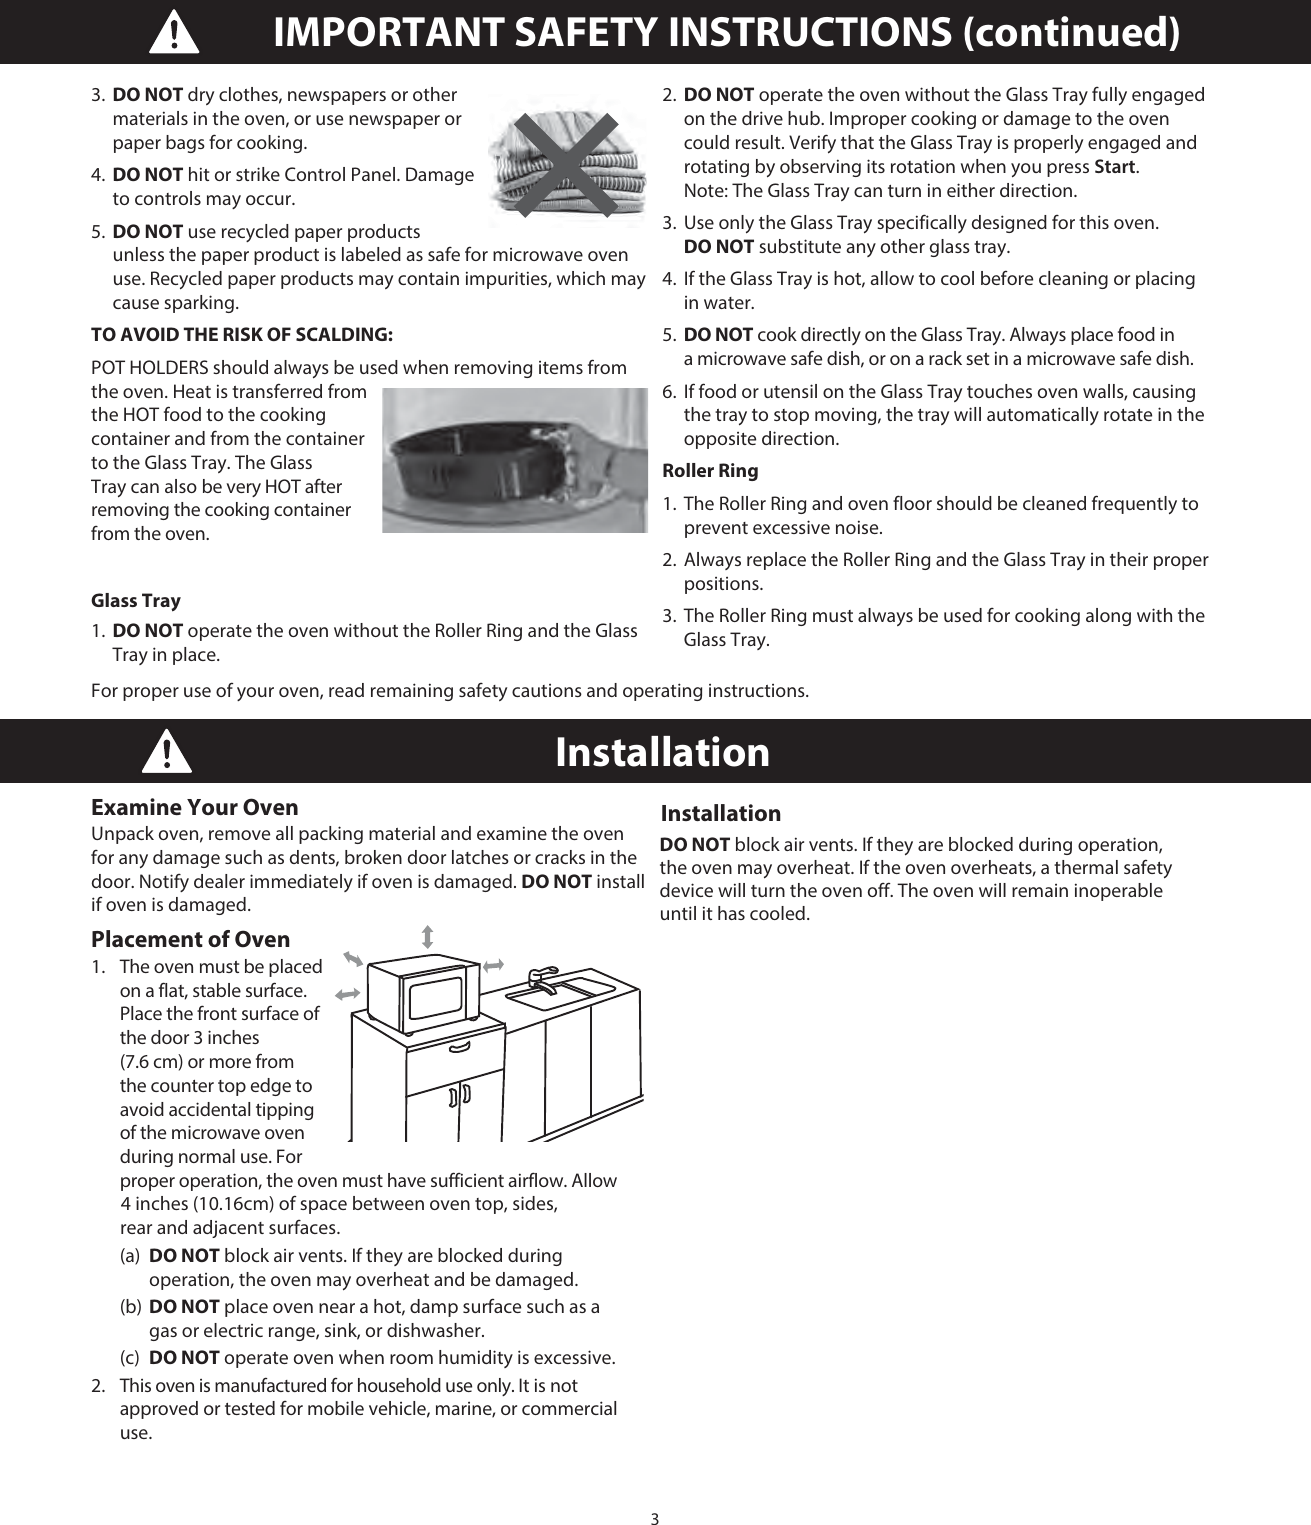 3IMPORTANT SAFETY INSTRUCTIONS (continued)Installation Examine Your Oven Unpack oven, remove all packing material and examine the oven for any damage such as dents, broken door latches or cracks in the door. Notify dealer immediately if oven is damaged. DO NOT install if oven is damaged.Placement of Oven 1.   The oven must be placed on a flat, stable surface. Place the front surface of the door 3 inches (7.6 cm) or more from the counter top edge to avoid accidental tipping of the microwave oven during normal use. For proper operation, the oven must have sufficient airflow. Allow  (a) DO NOT block air vents. If they are blocked during      operation, the oven may overheat and be damaged.  (b) DO NOT place oven near a hot, damp surface such as a    gas or electric range, sink, or dishwasher.  (c) DO NOT operate oven when room humidity is excessive. 2.   This oven is manufactured for household use only. It is not approved or tested for mobile vehicle, marine, or commercial use. Installation DO NOT block air vents. If they are blocked during operation, the oven may overheat. If the oven overheats, a thermal safety device will turn the oven off. The oven will remain inoperable until it has cooled.3.  DO NOT dry clothes, newspapers or other materials in the oven, or use newspaper or paper bags for cooking. 4.  DO NOT hit or strike Control Panel. Damage to controls may occur.5.  DO NOT use recycled paper products unless the paper product is labeled as safe for microwave oven use. Recycled paper products may contain impurities, which may cause sparking.TO AVOID THE RISK OF SCALDING:POT HOLDERS should always be used when removing items from the oven. Heat is transferred from the HOT food to the cooking container and from the container to the Glass Tray. The Glass Tray can also be very HOT after removing the cooking container from the oven.Glass Tray 1.  DO NOT operate the oven without the Roller Ring and the Glass Tray in place. 2.  DO NOT operate the oven without the Glass Tray fully engaged on the drive hub. Improper cooking or damage to the oven could result. Verify that the Glass Tray is properly engaged and rotating by observing its rotation when you press Start. Note: The Glass Tray can turn in either direction. 3.  Use only the Glass Tray specifically designed for this oven. DO NOT substitute any other glass tray. 4.  If the Glass Tray is hot, allow to cool before cleaning or placing in water. 5.  DO NOT cook directly on the Glass Tray. Always place food in a microwave safe dish, or on a rack set in a microwave safe dish.6.  If food or utensil on the Glass Tray touches oven walls, causing the tray to stop moving, the tray will automatically rotate in the opposite direction.Roller Ring1.  The Roller Ring and oven floor should be cleaned frequently to prevent excessive noise.2.  Always replace the Roller Ring and the Glass Tray in their proper positions.3.  The Roller Ring must always be used for cooking along with the Glass Tray.For proper use of your oven, read remaining safety cautions and operating instructions. 4 inches (10.16cm) of space between oven top, sides, rear and adjacent surfaces. 